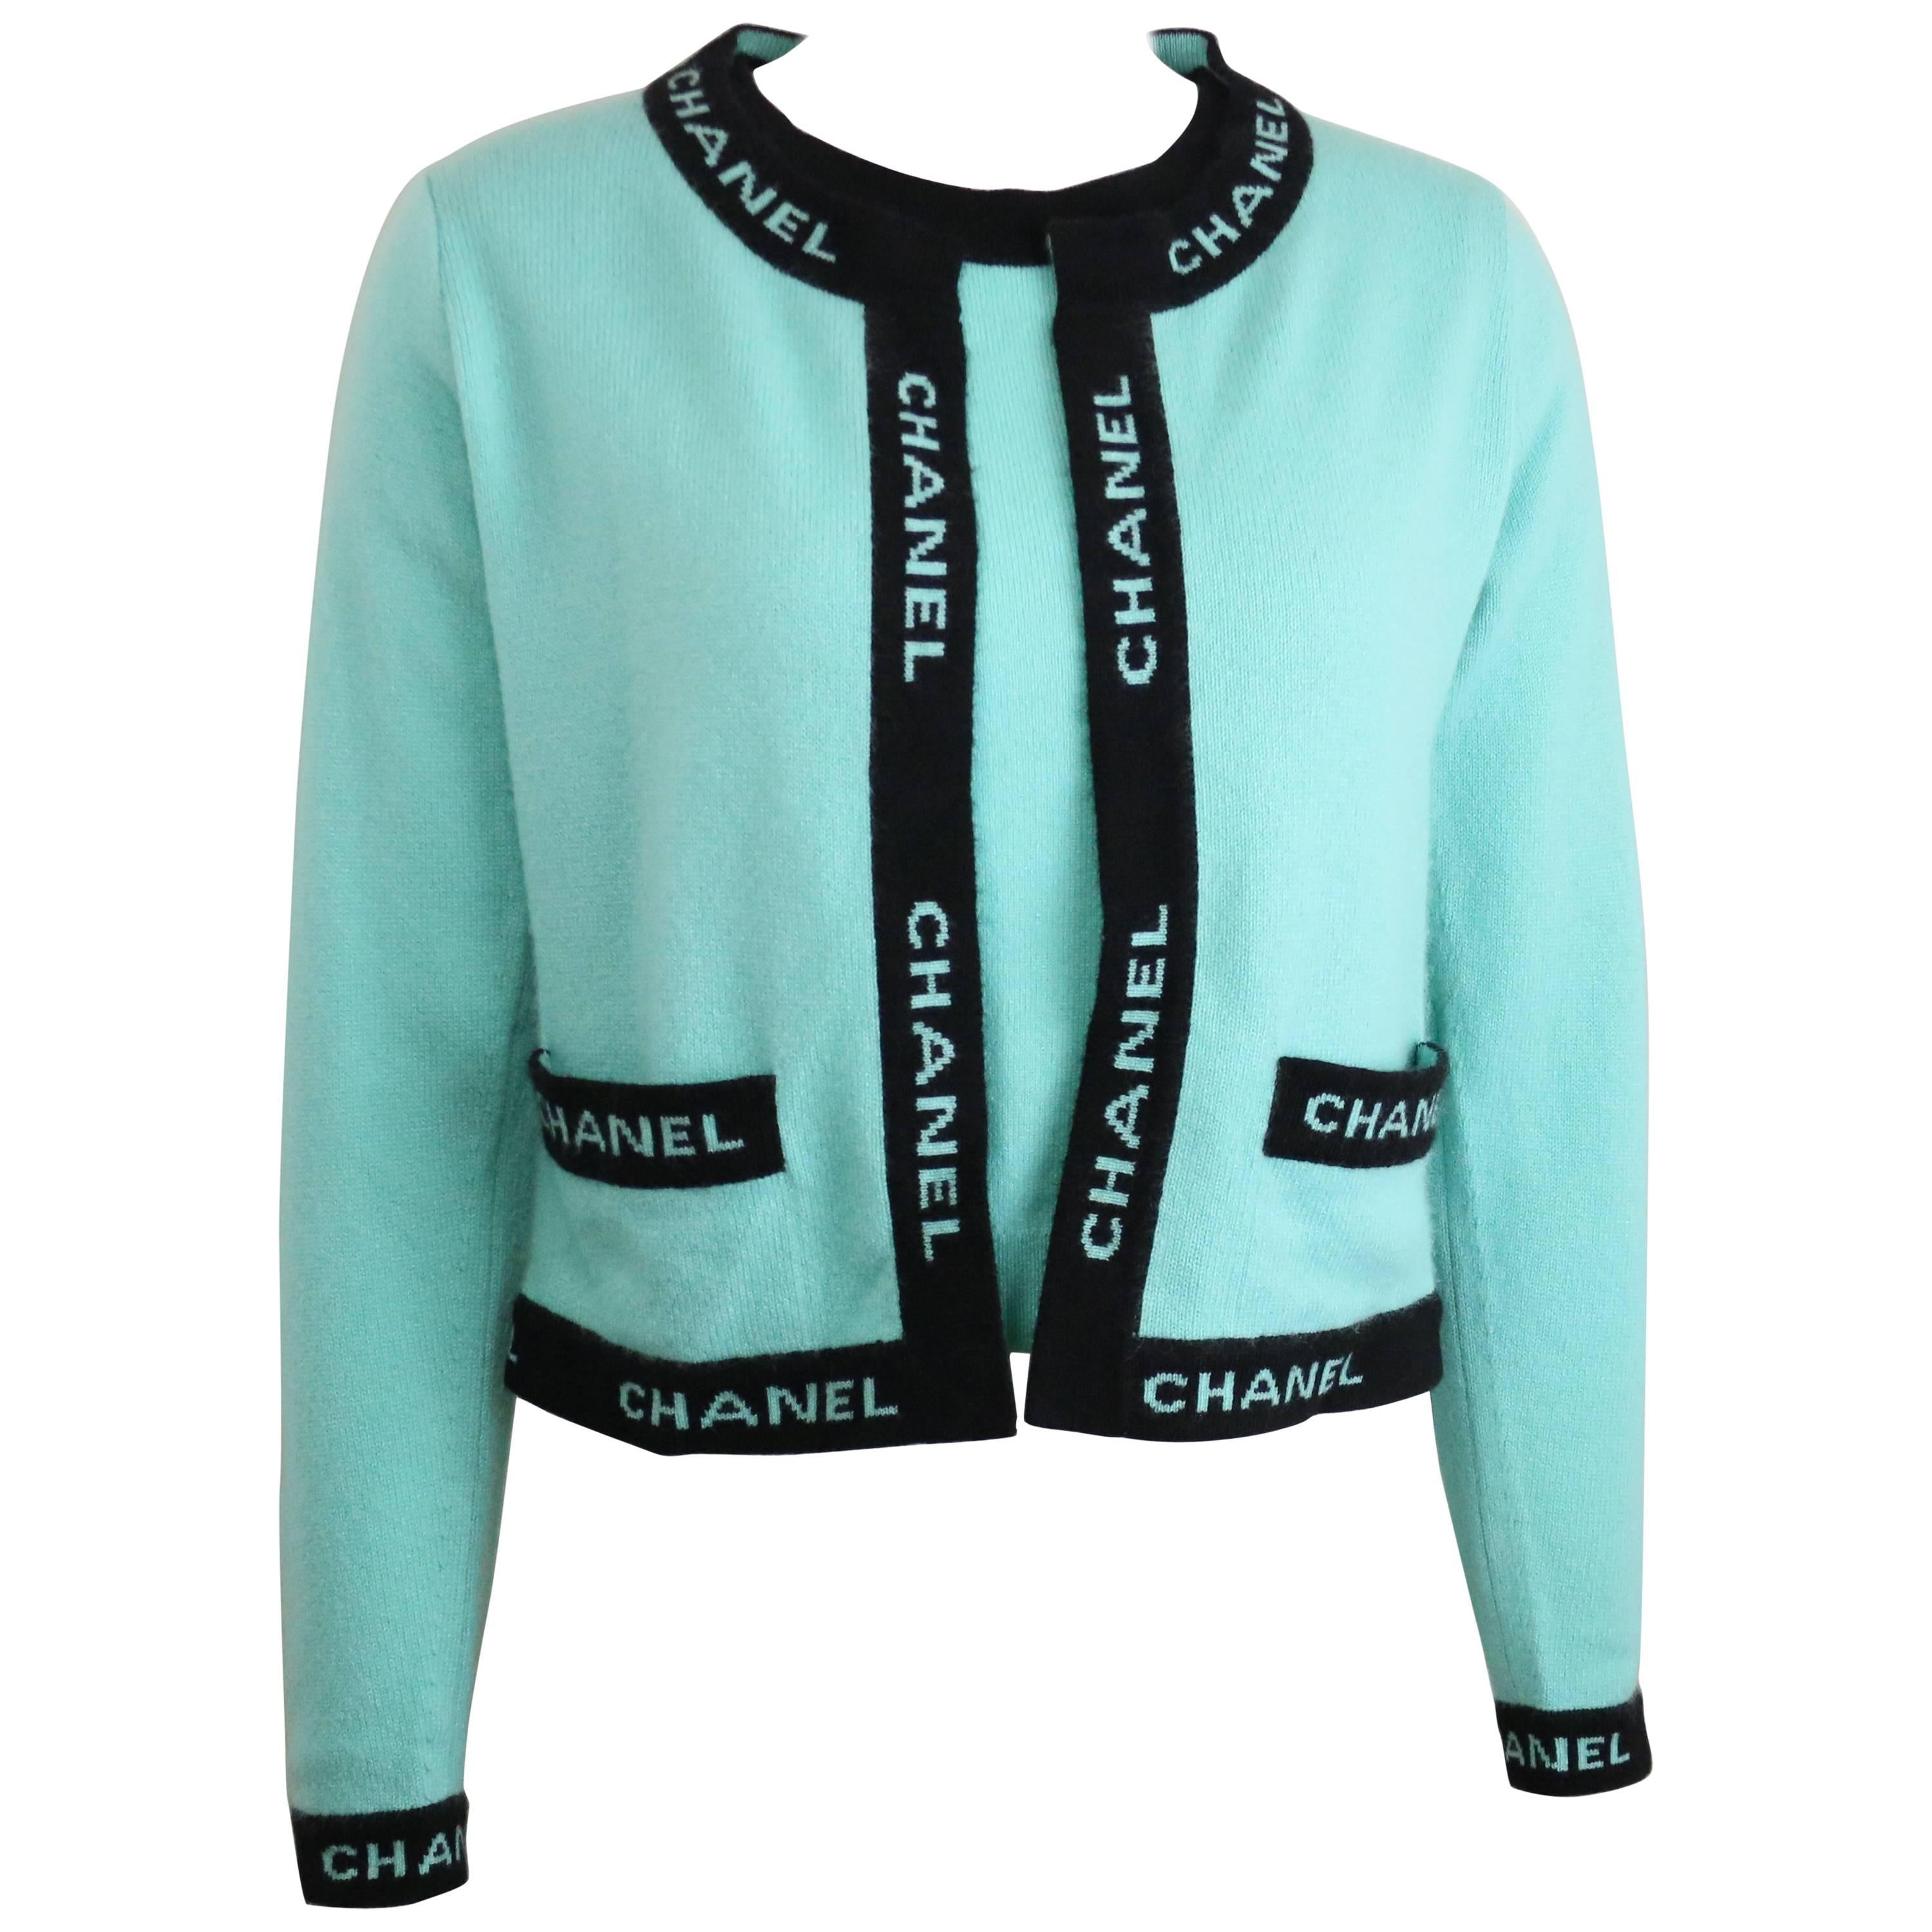 Chanel Turquoise Cashmere Black "Chanel" Piping Trim Twin-Sets